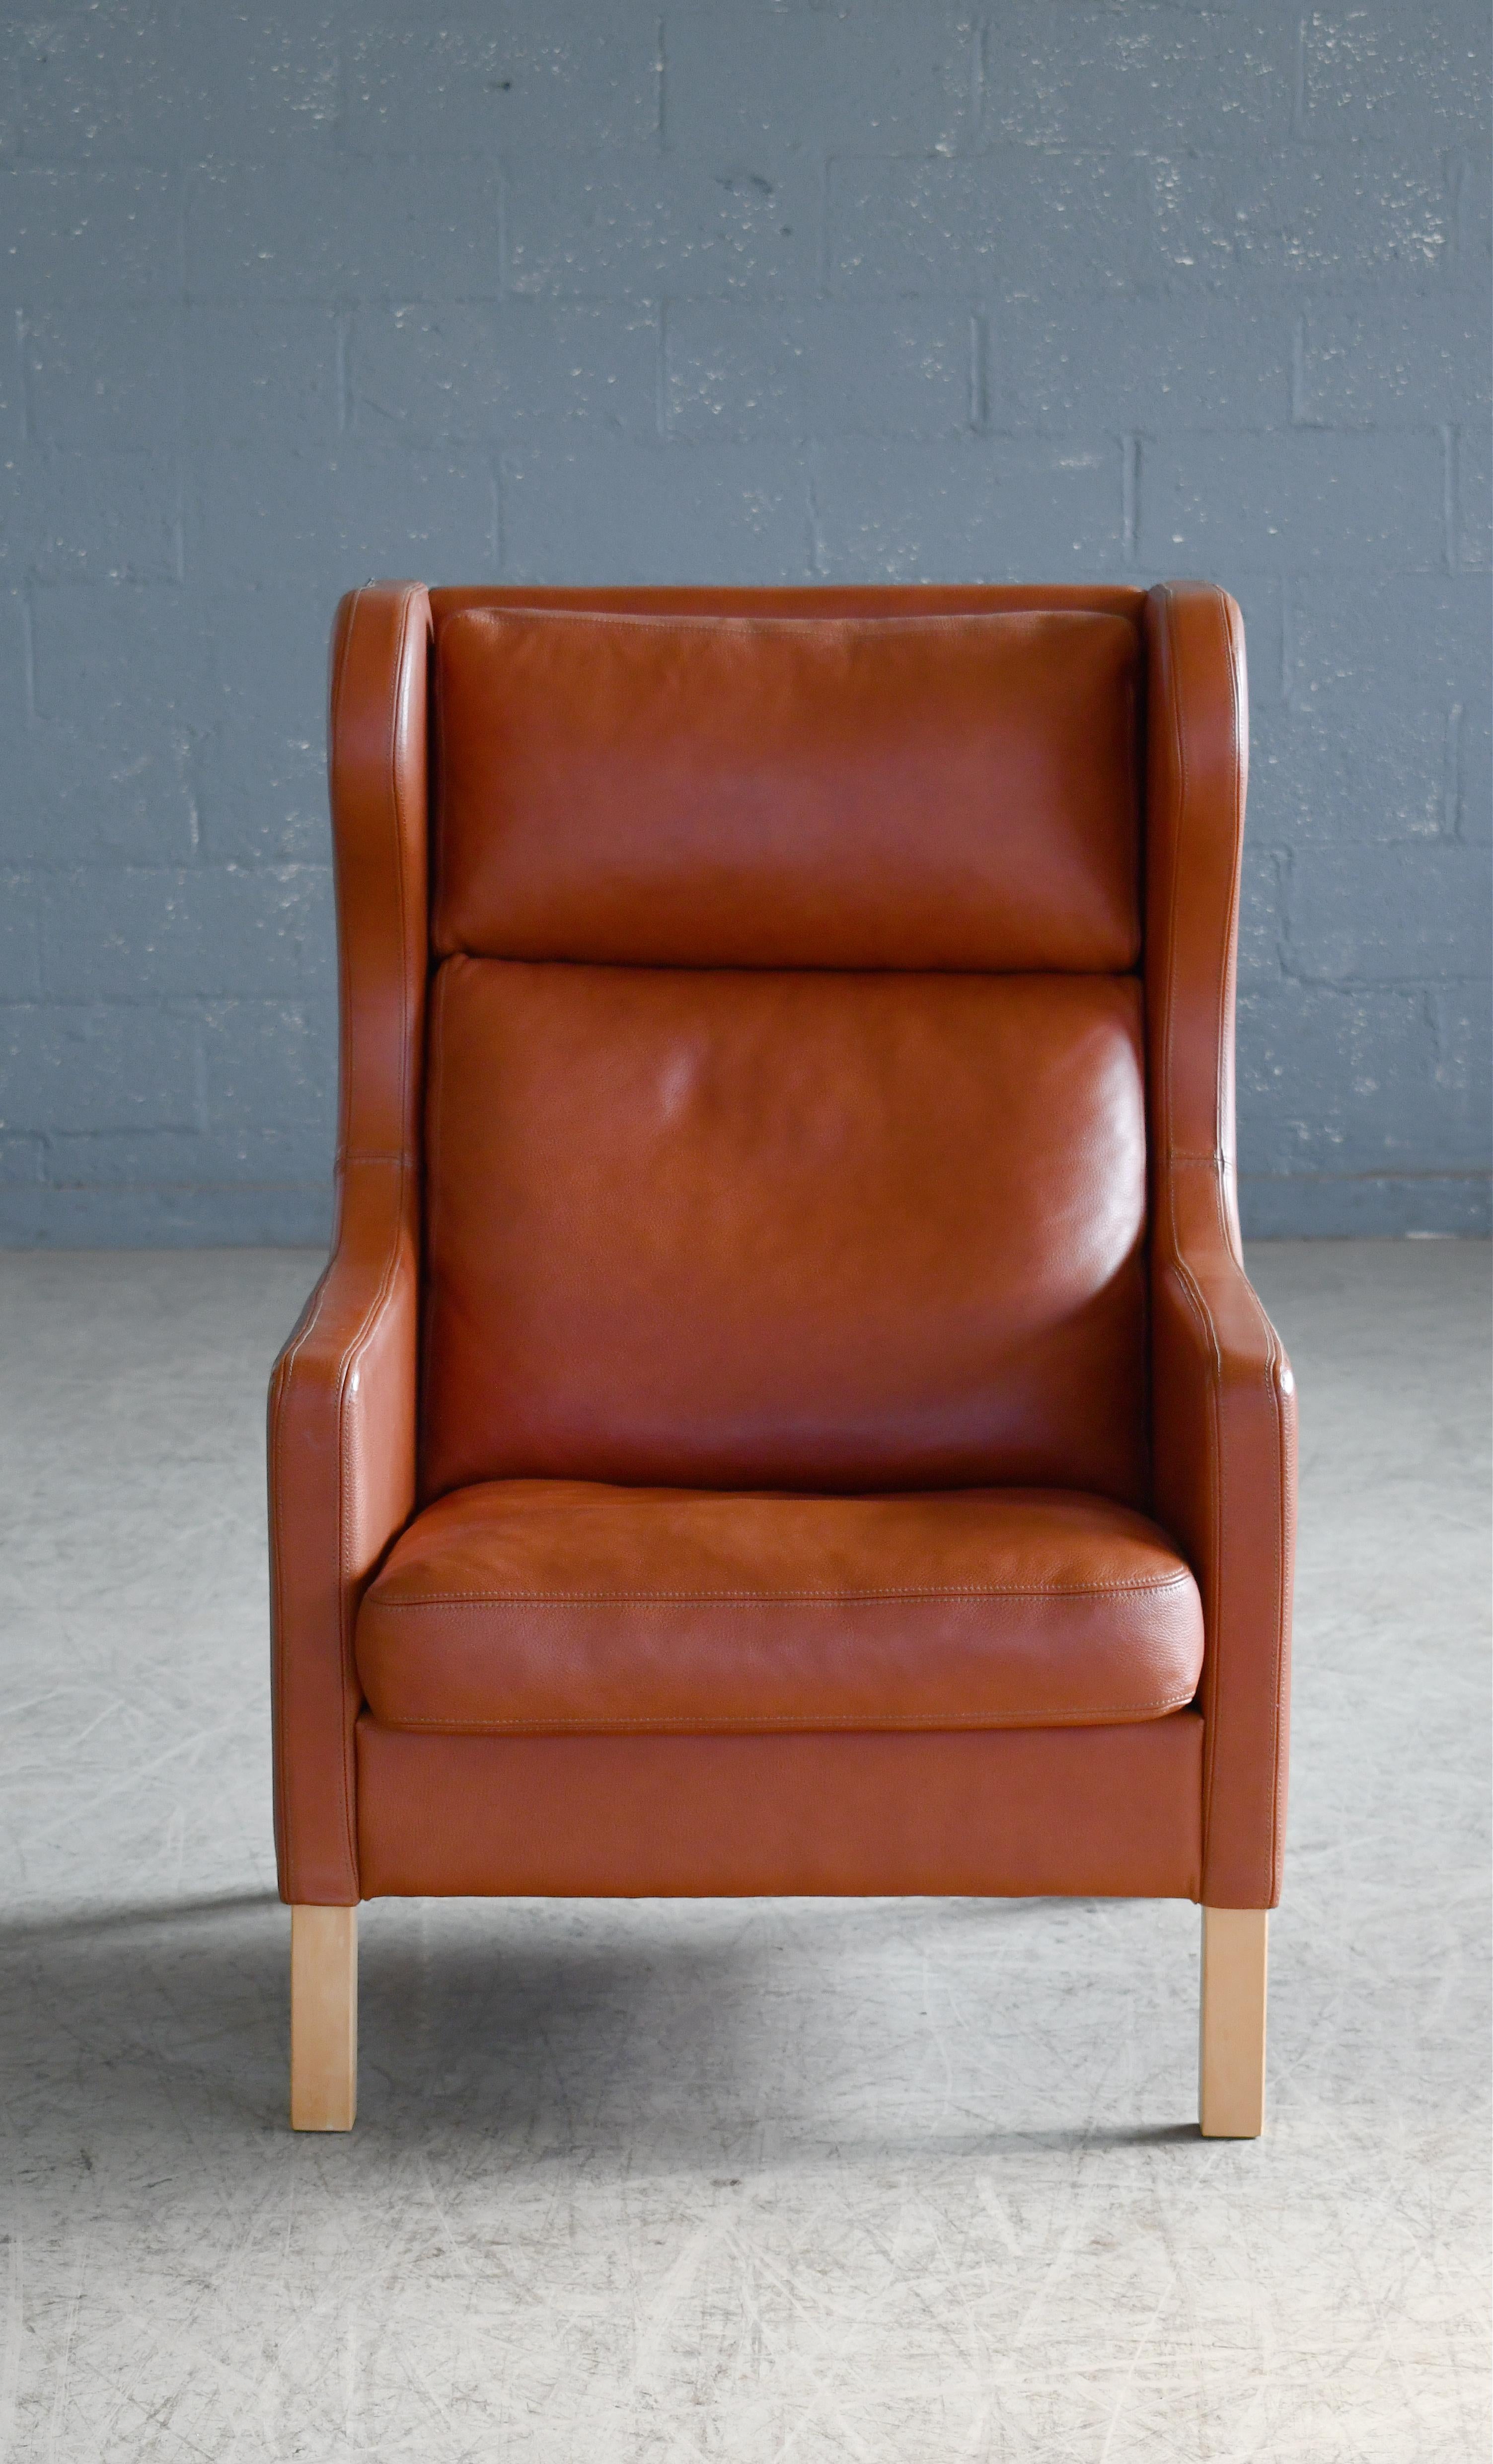 Skalma produced version of Børge Mogensen's famous lounge chair model 2204. Very elegant classic mid-century highback  lounge chairs from the golden era of Danish modern.. A perennial design that will just never go out of style. While Borge